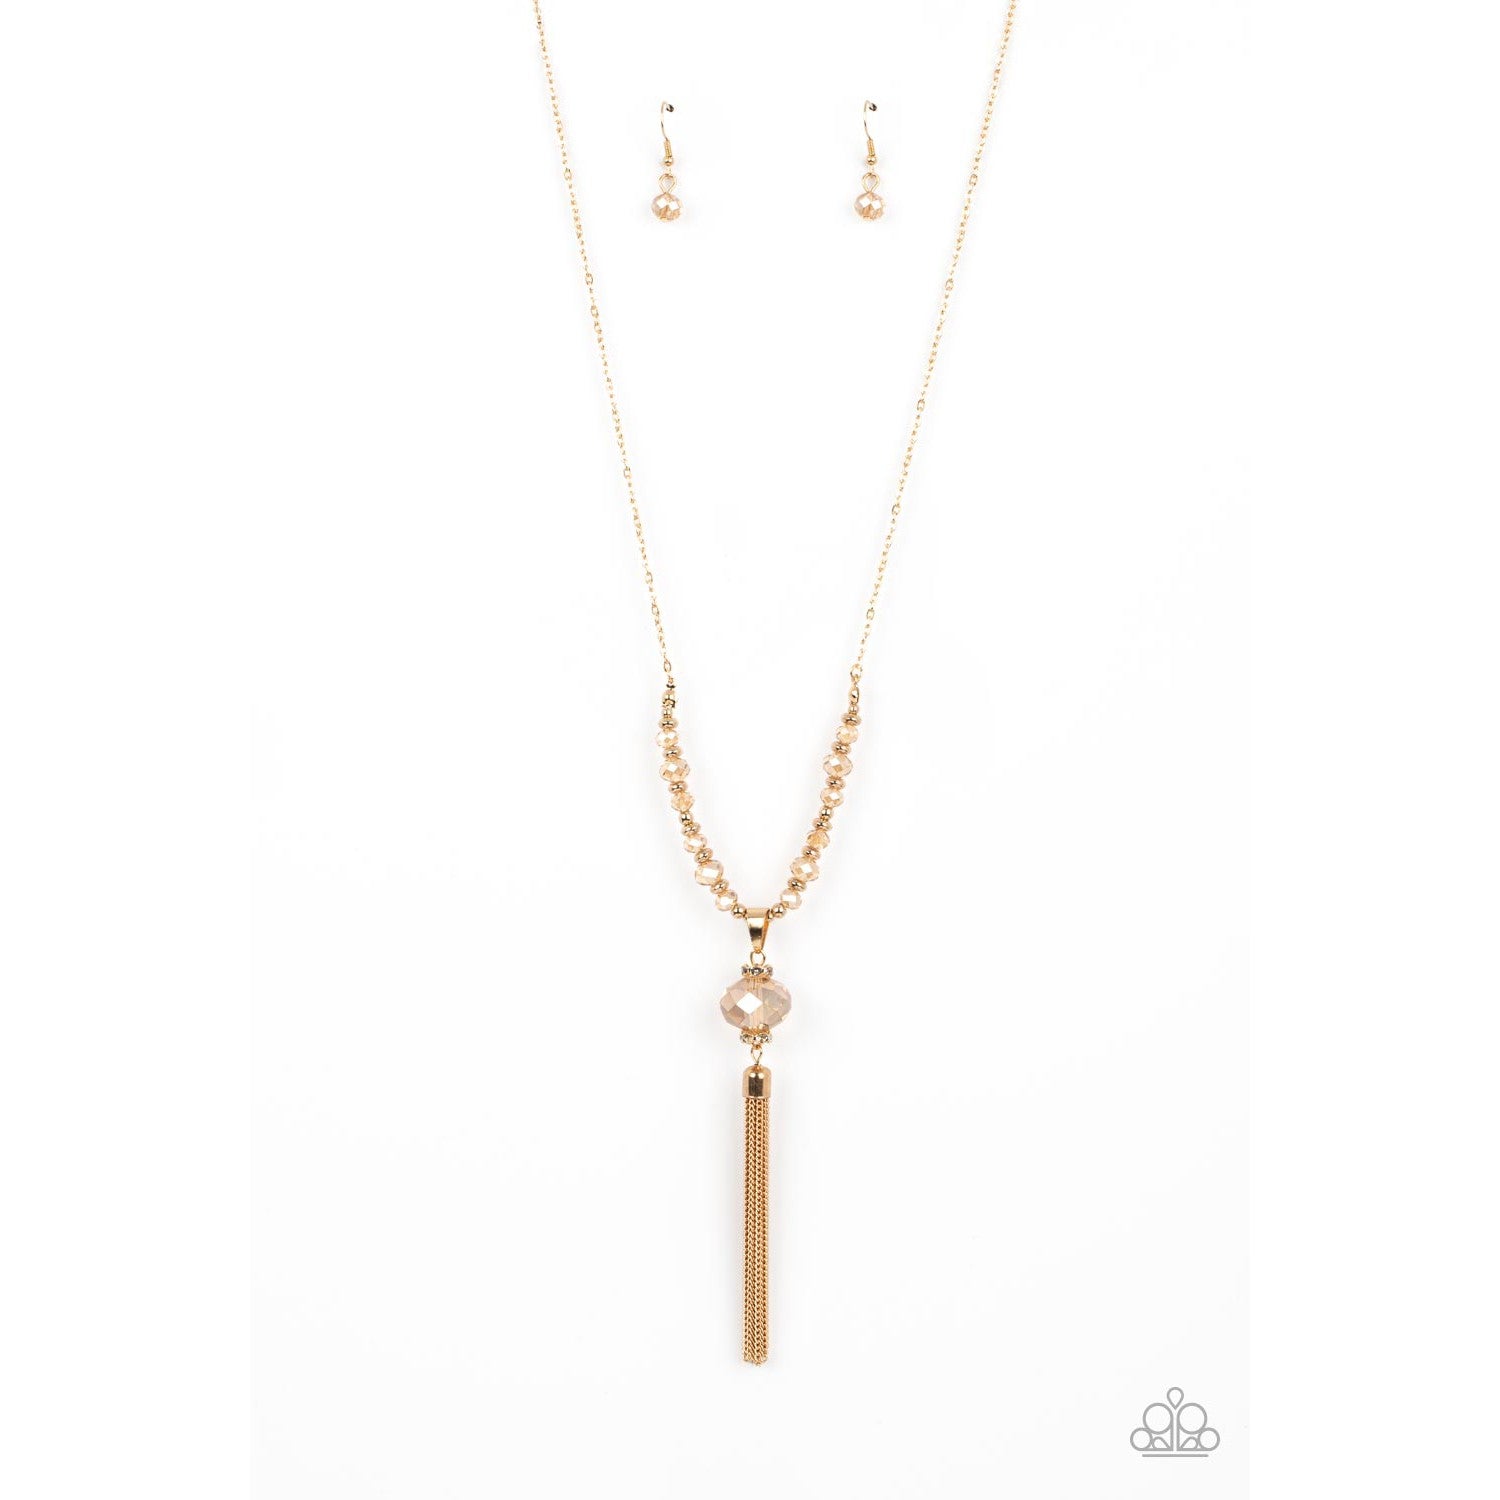 One SWAY or Another - Gold Necklace - Bling by Danielle Baker